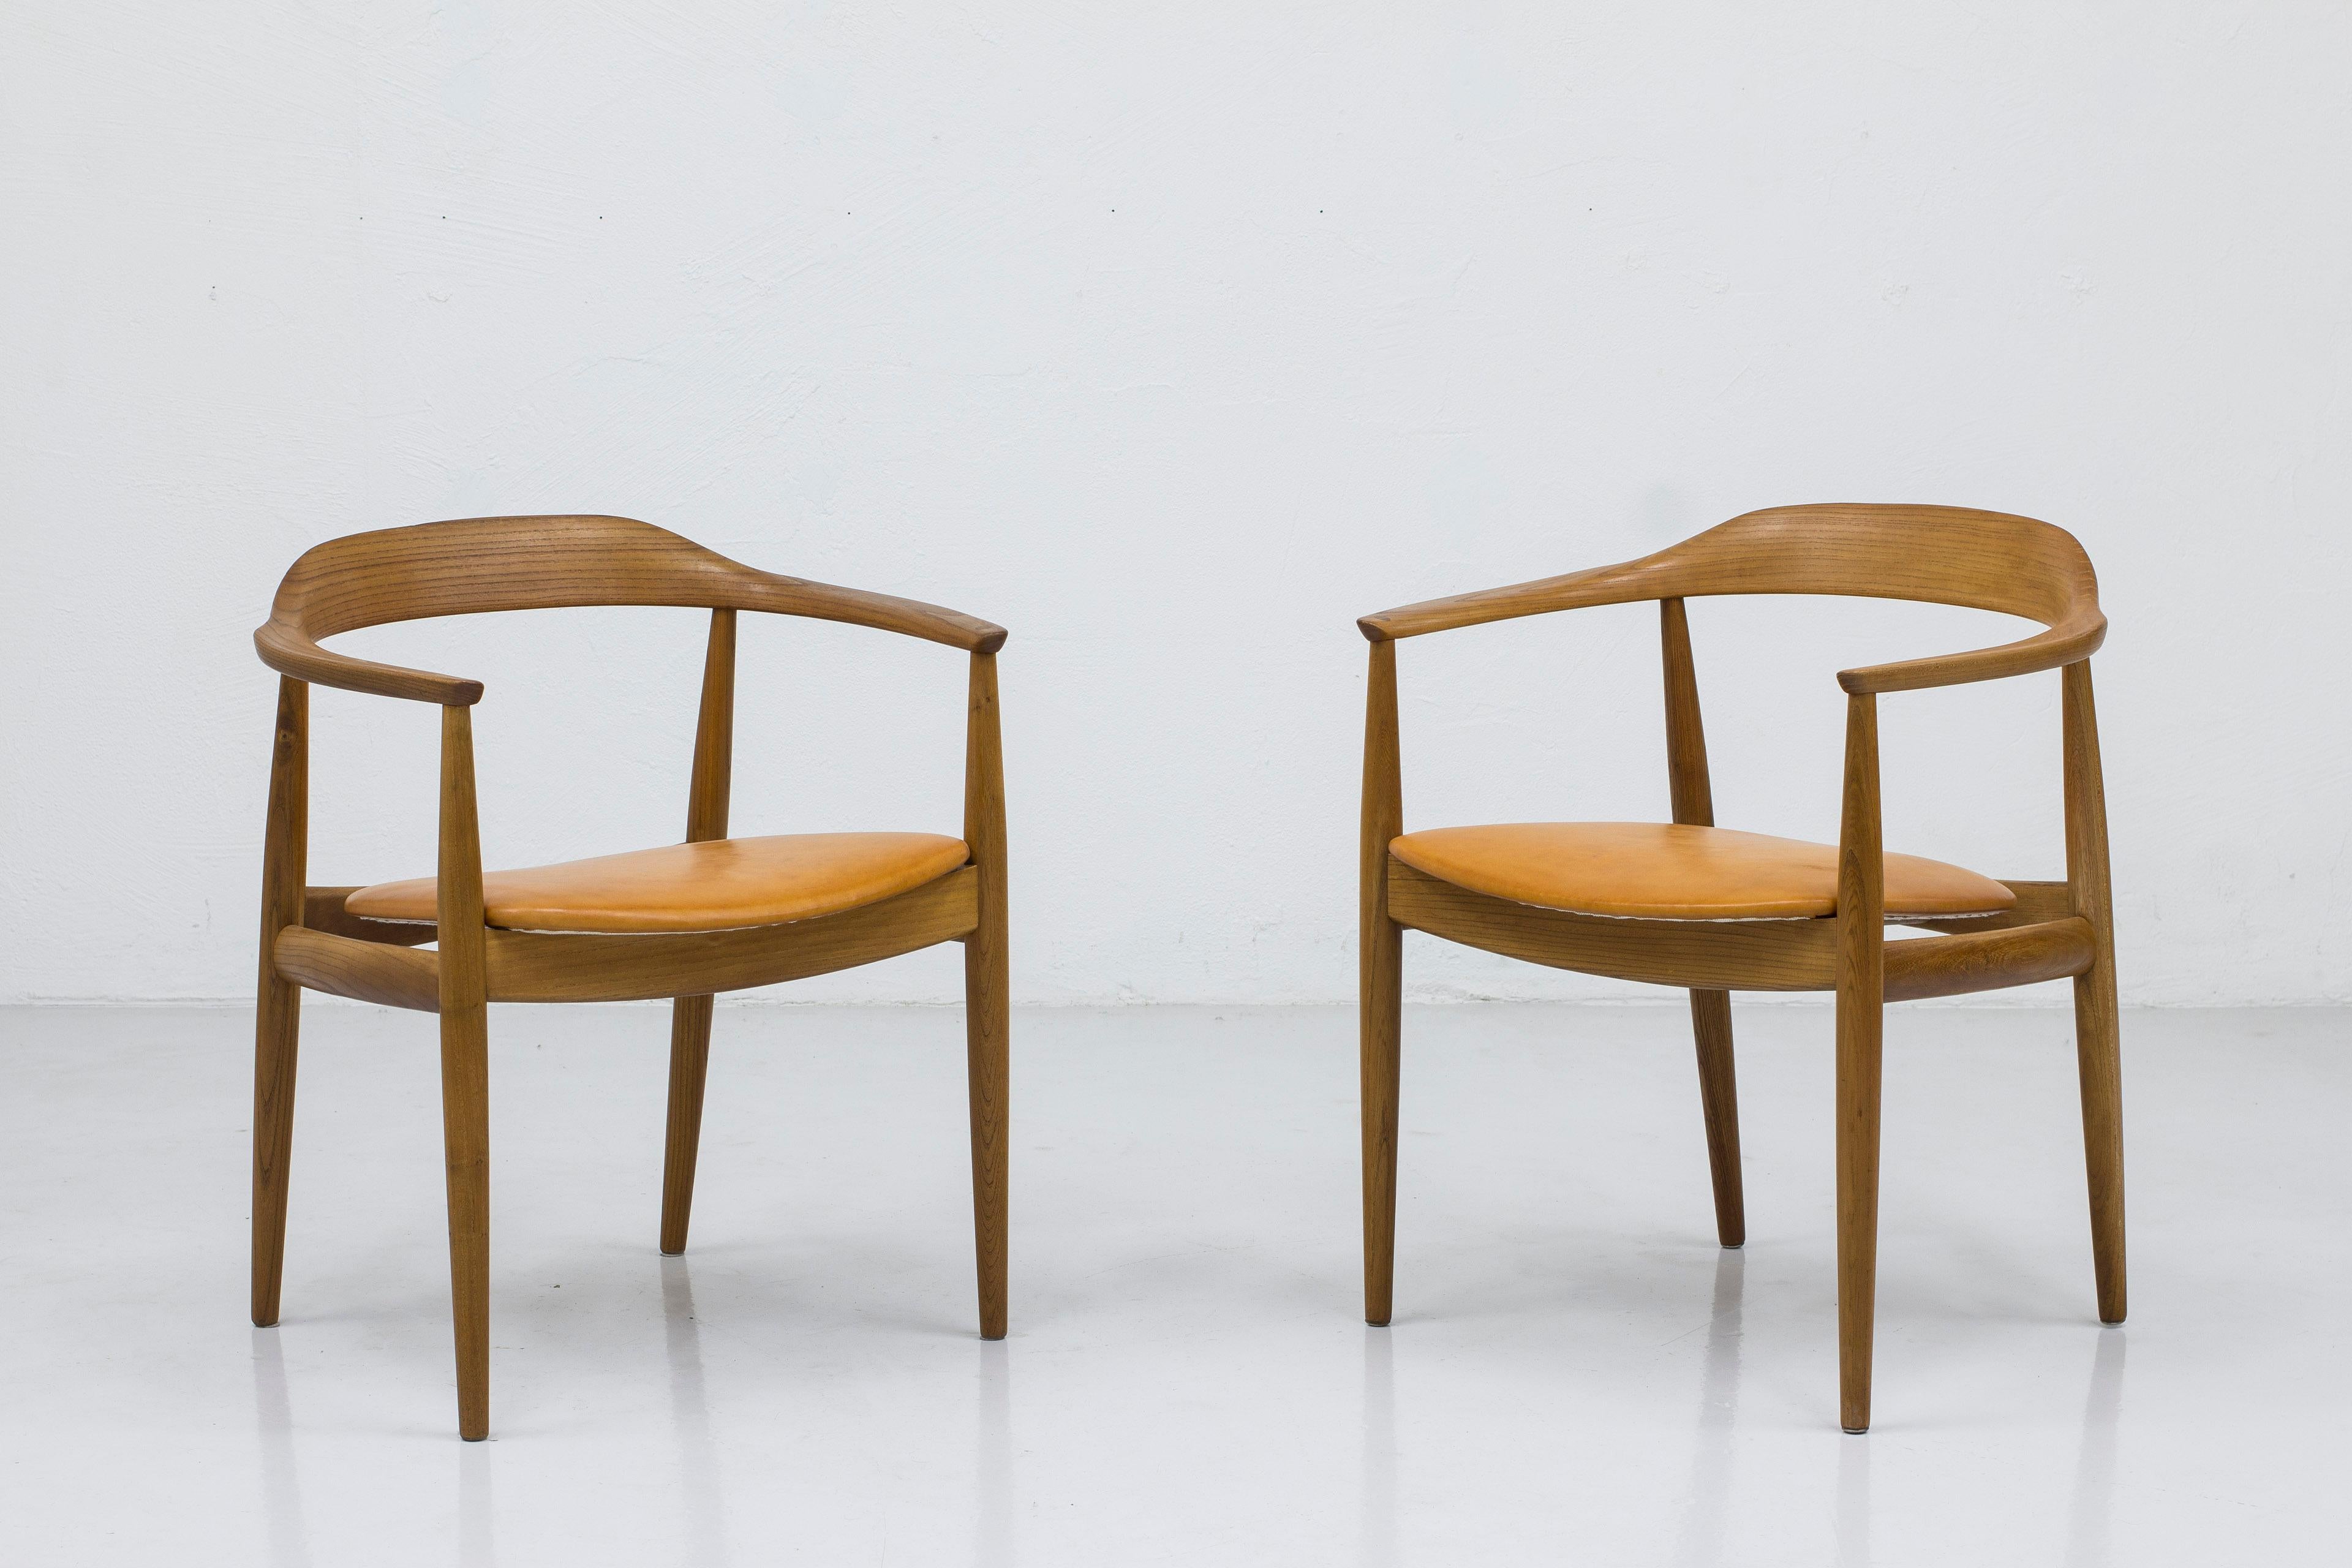 Arm chairs designed by Arne Wahl Iversen. Manufactured in Denmark by cabinet maker Niels Eilersen during the 1950s. Made from solid elm with beautiful grain and structure and seats with cognac leather. Very good vintage condition with few signs of